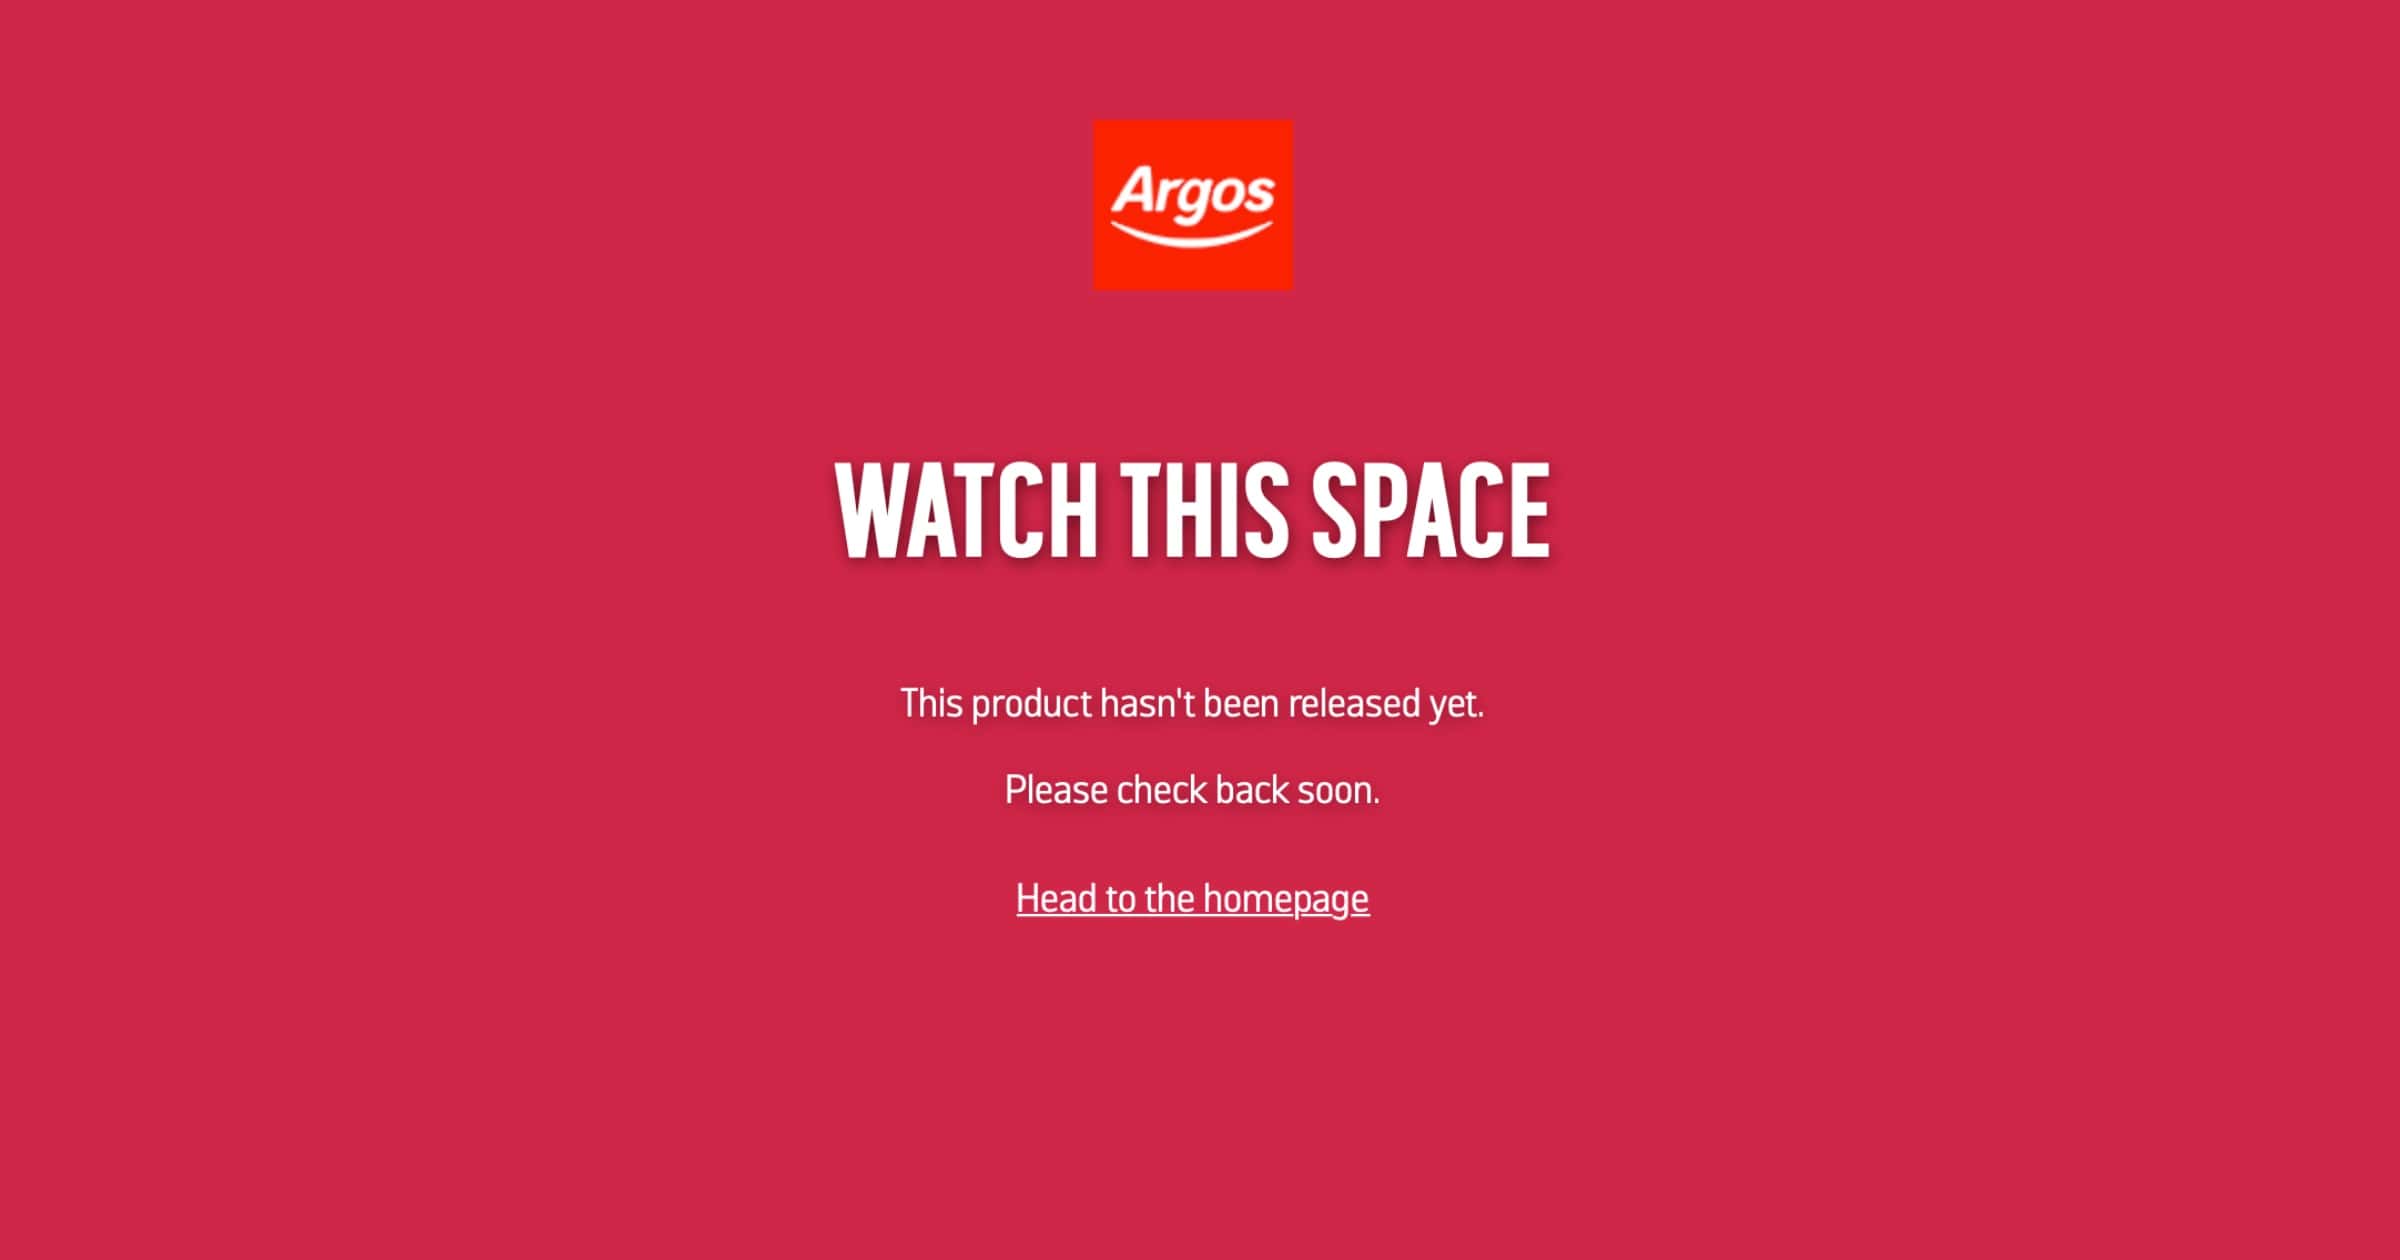 British Retailer Argos Stops Selling Apple TV 4K After Making it Available Early